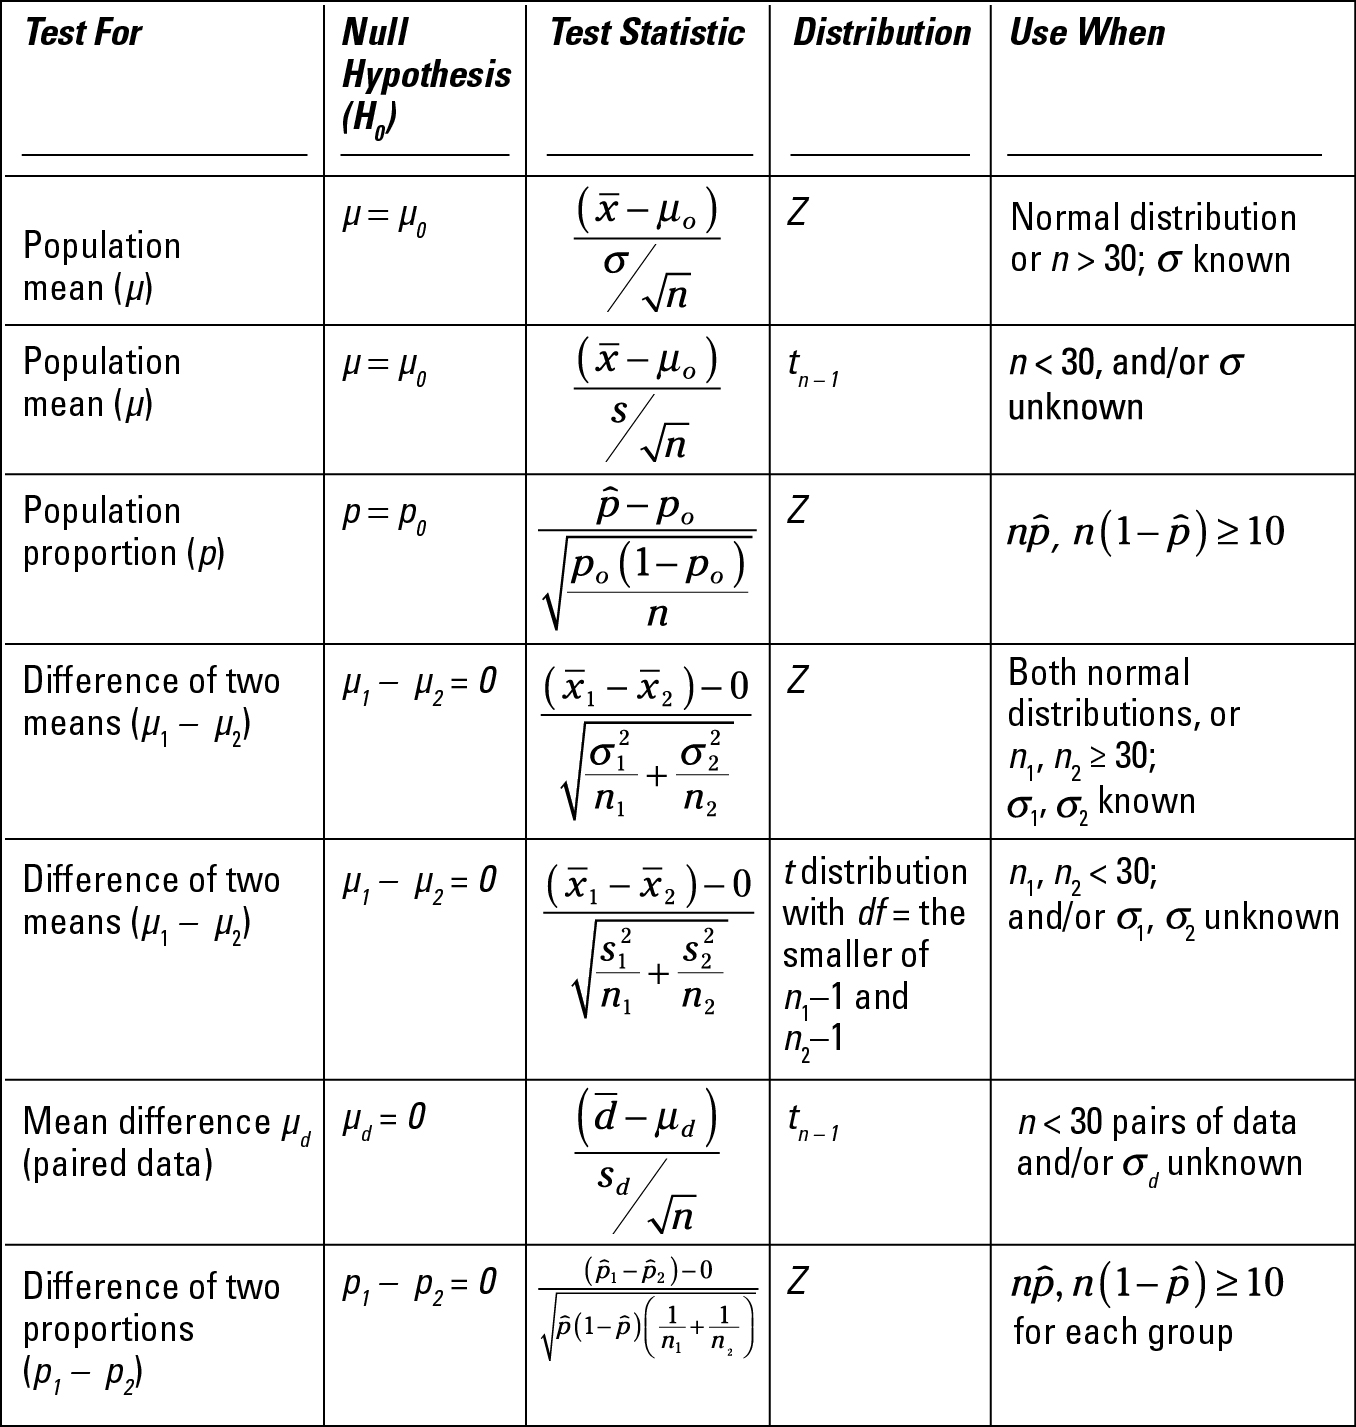 Test For Population mean (V) Population mean (V) Population
 proportion (p) Difference of two means (VI — "2) Difference of two
 means (VI — "2) Mean difference (paired data) Difference of two
 proportions Null Hypothesis P P Test Statistic (f—go) po (I—po ) n 2
 01 02 2 2 (DI -D2 )-O p(l—p) Distribution z z z tdistribution with the
 smaller of n—l and z Use When Normal distribution or n \> 30; o known
 n < 30, and/or o unknown nD, 2 10 Both normal distributions, or 171,
 30; q, known 171, < 30; and/or q, g unknown n < 30 pairs of data
 and/or o d unknown nD, 10 for each group 